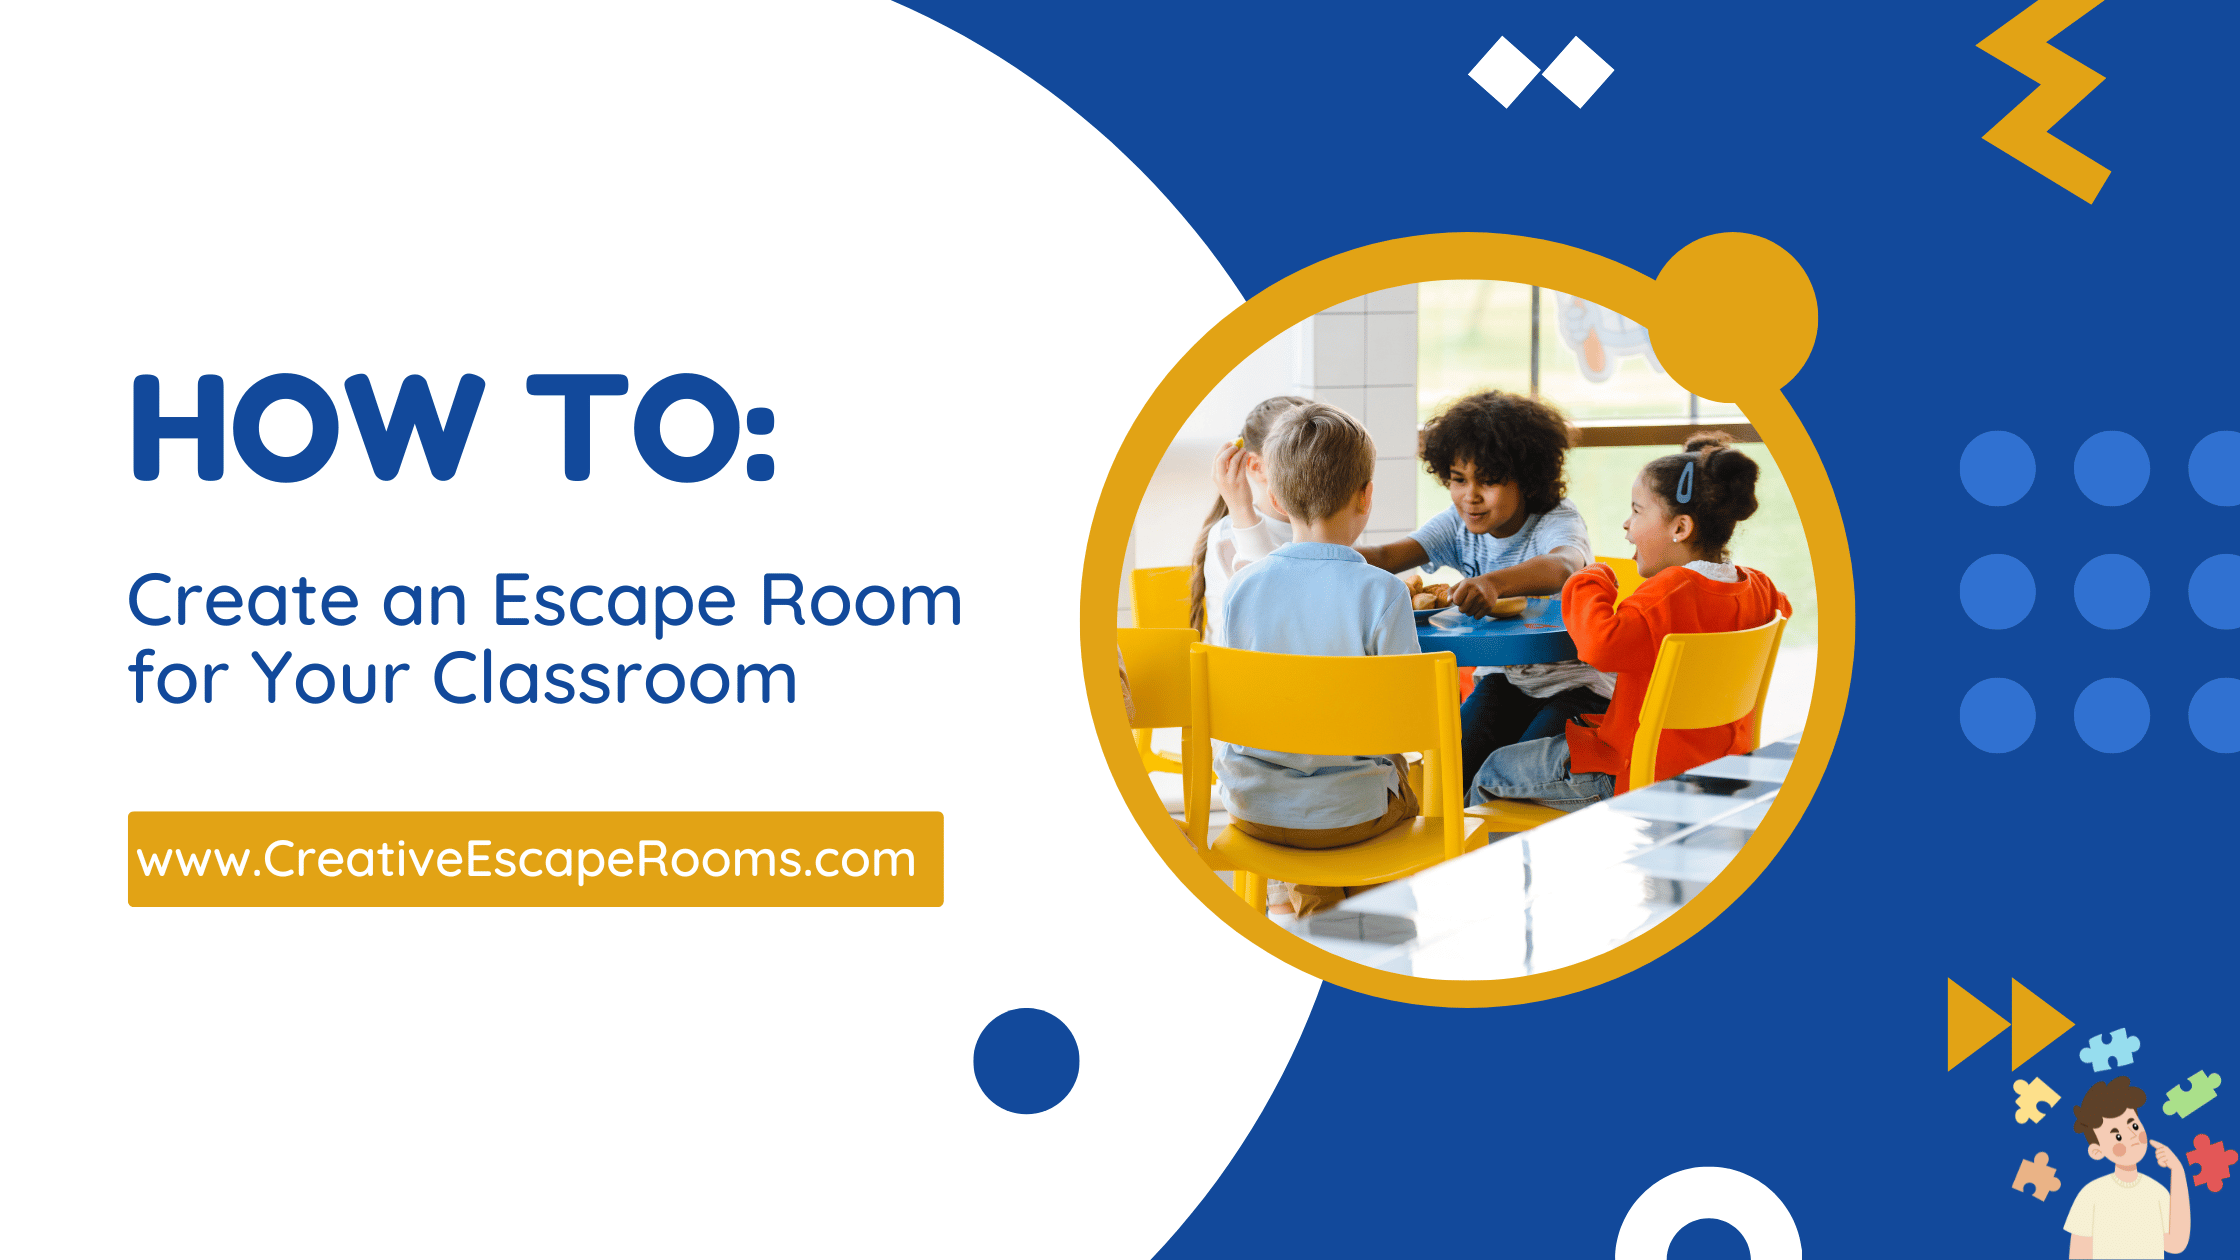 Educational Adventure: Creating an Escape Room for Your Classroom